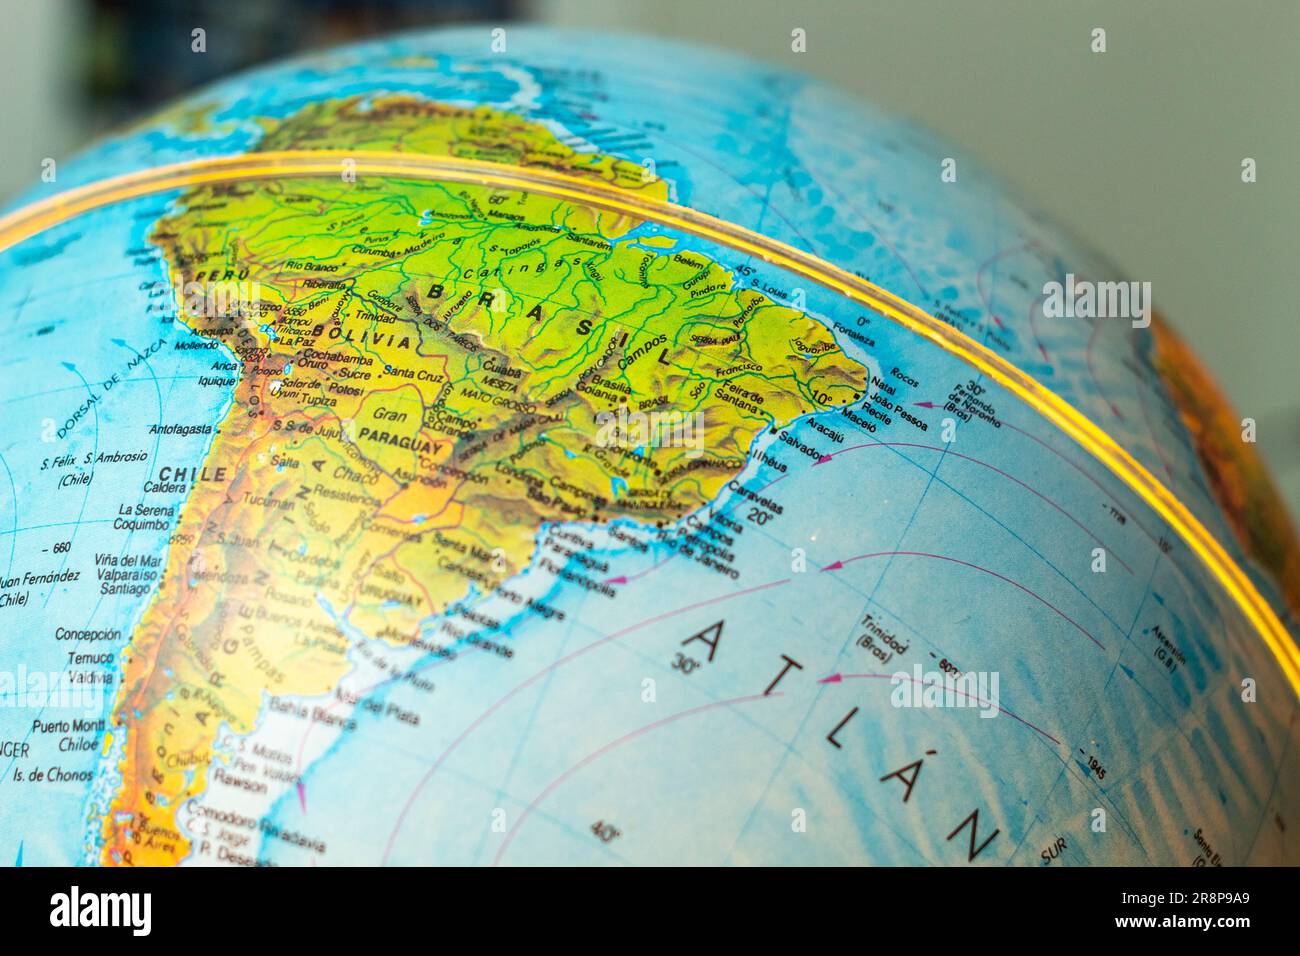 Close-up view of a globe featuring the continent of South America, showcasing its various countries and geographical features Stock Photo